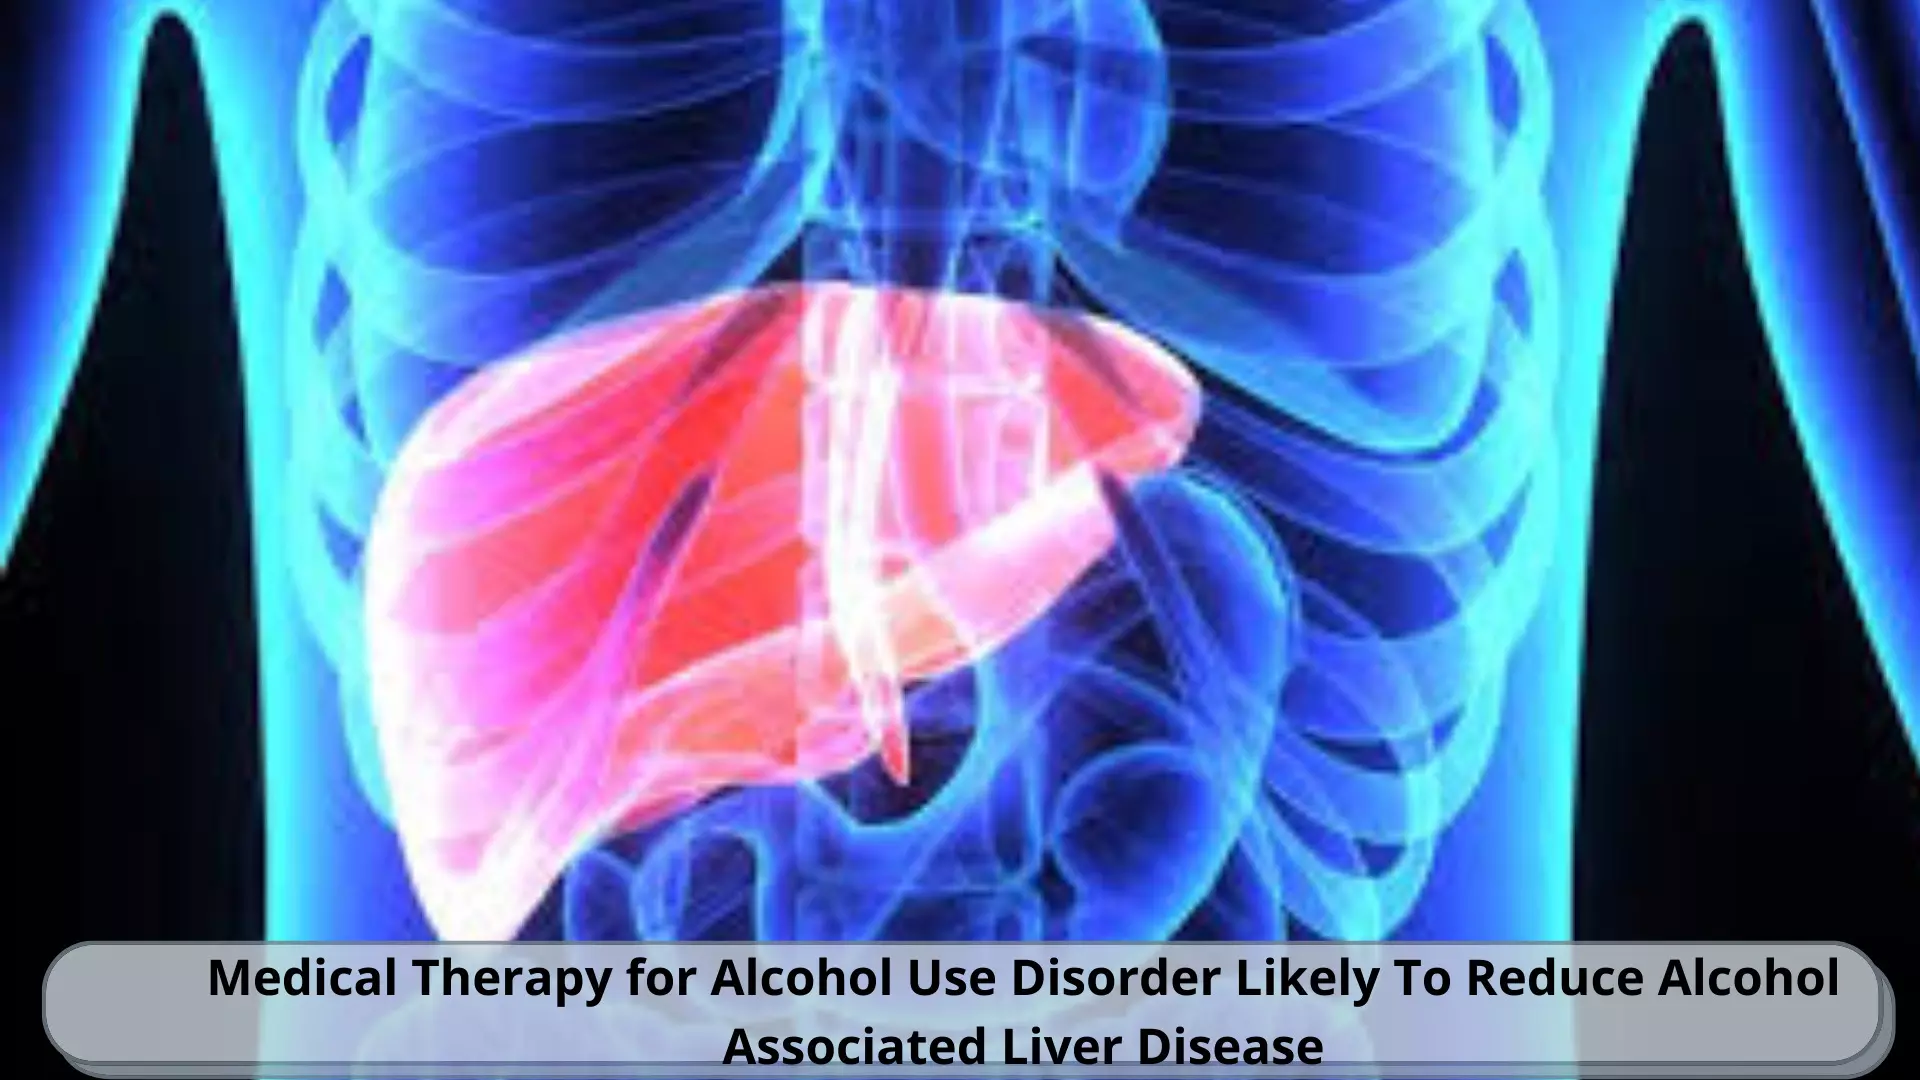 Medical Therapy for Alcohol Use Disorder Likely To Reduce Alcohol Associated Liver Disease